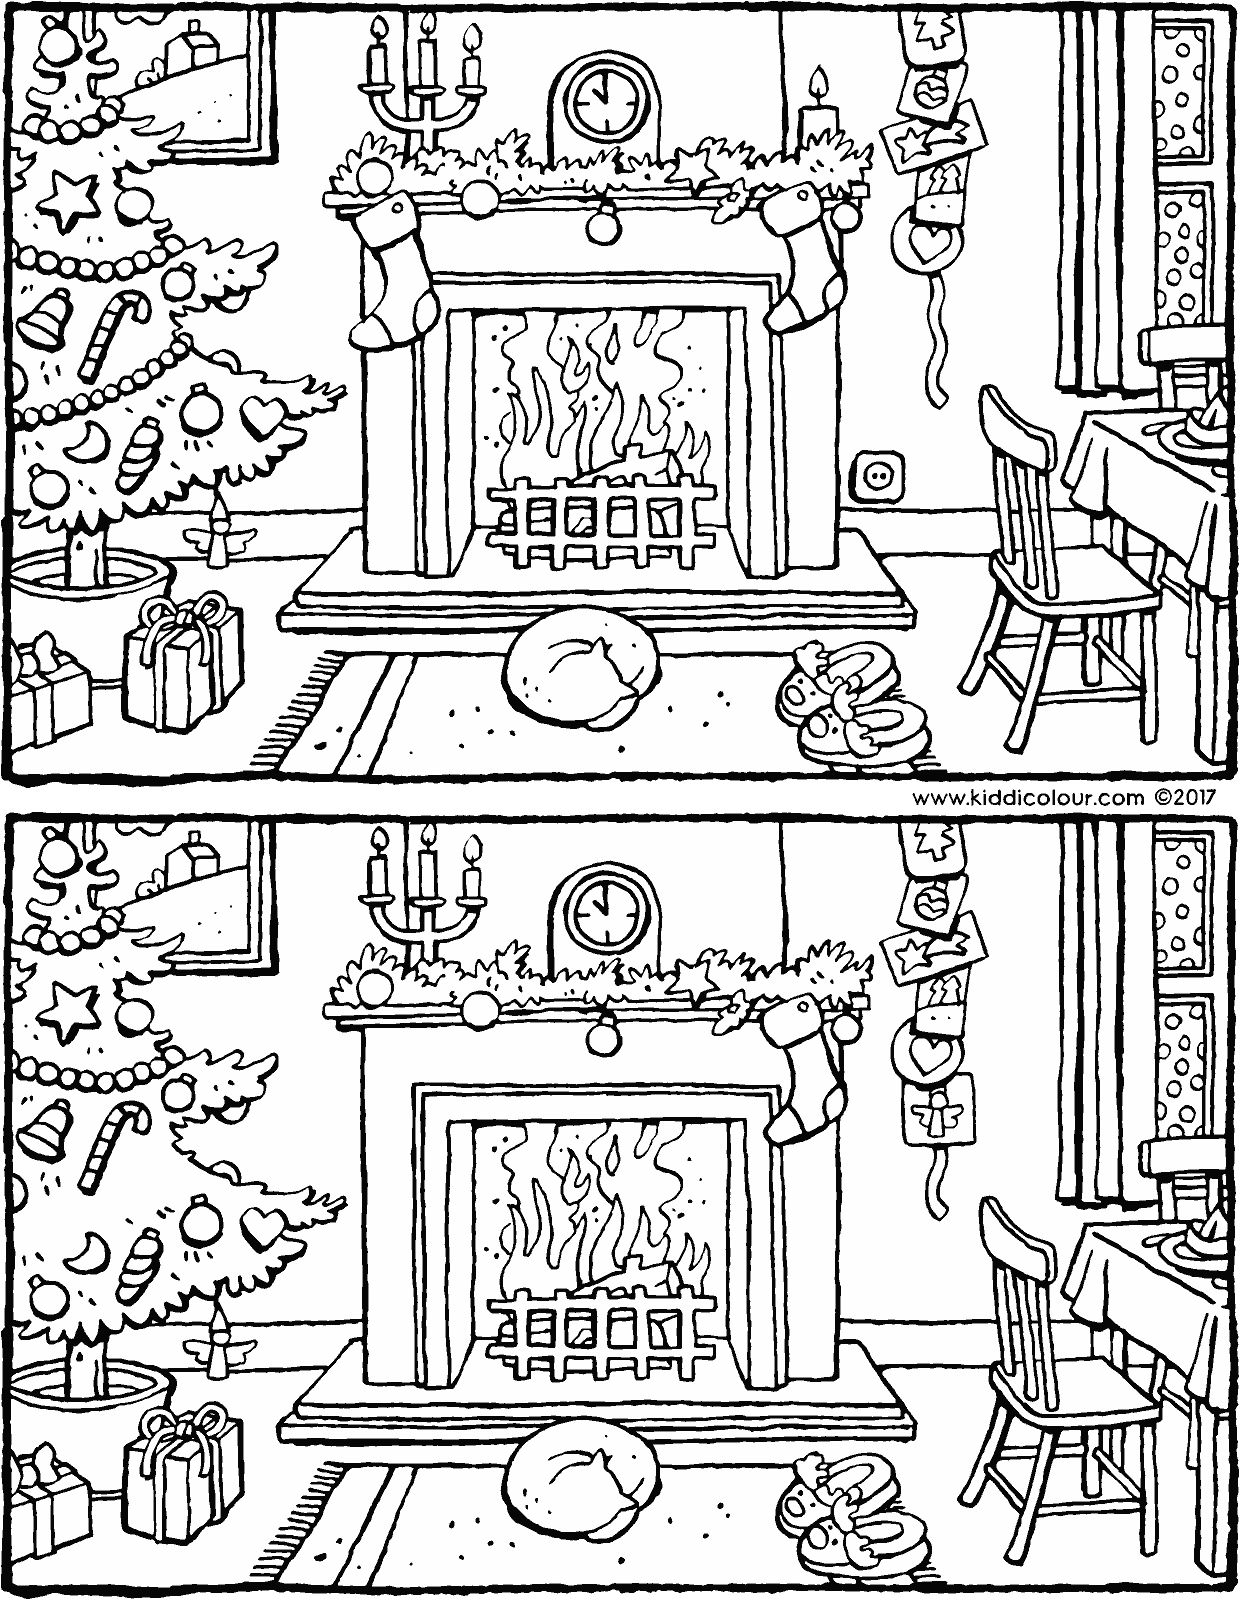 spot the five differences for Christmas - kiddicolour